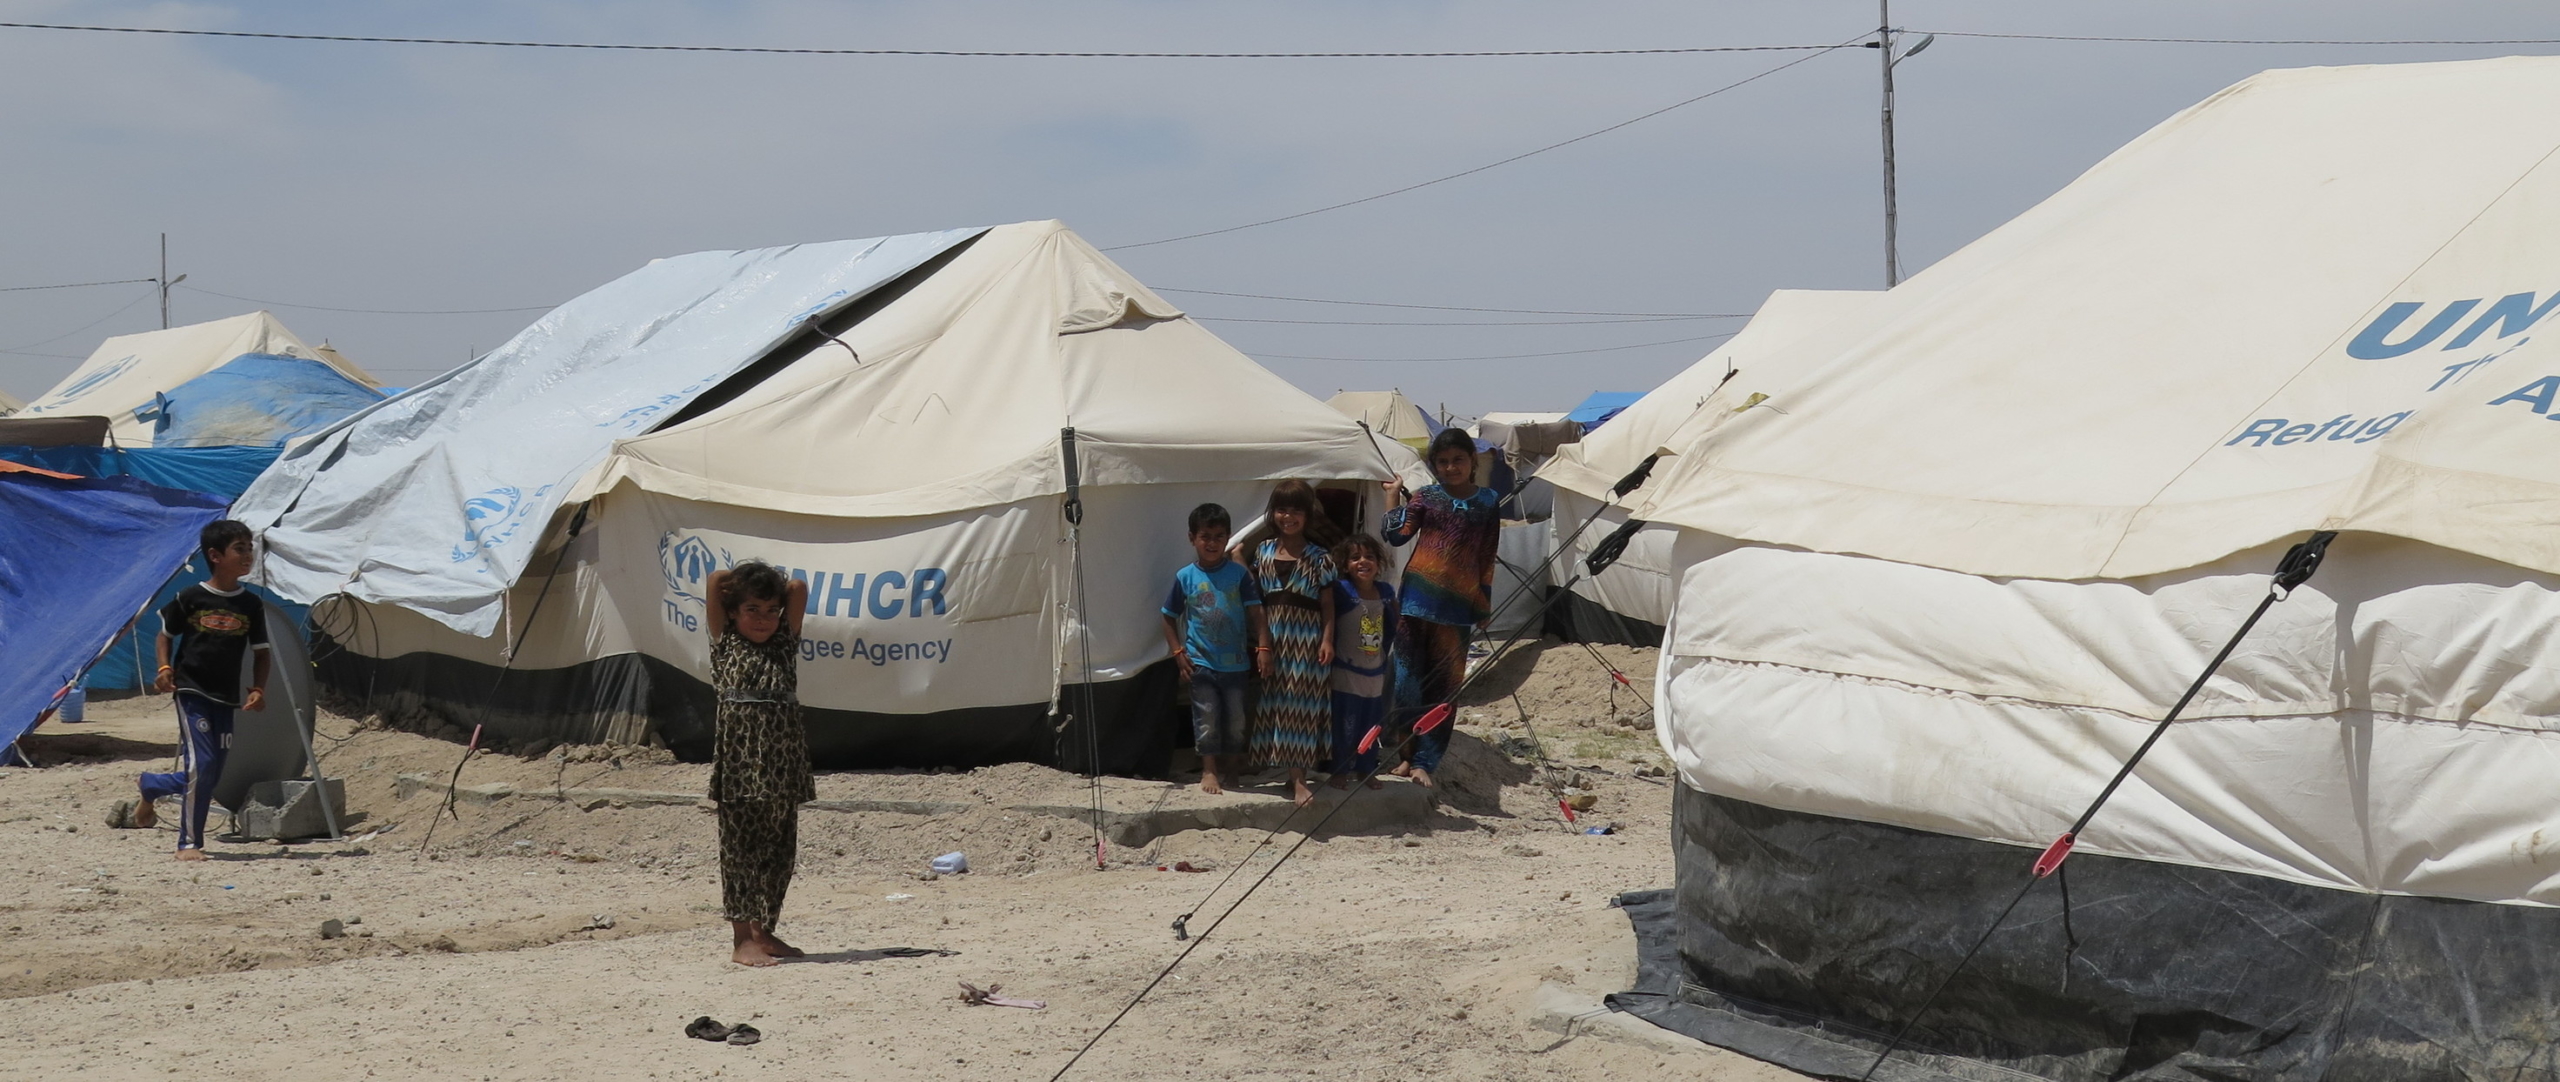 Iraqis who fled IS rule face harrowing future - Amnesty International